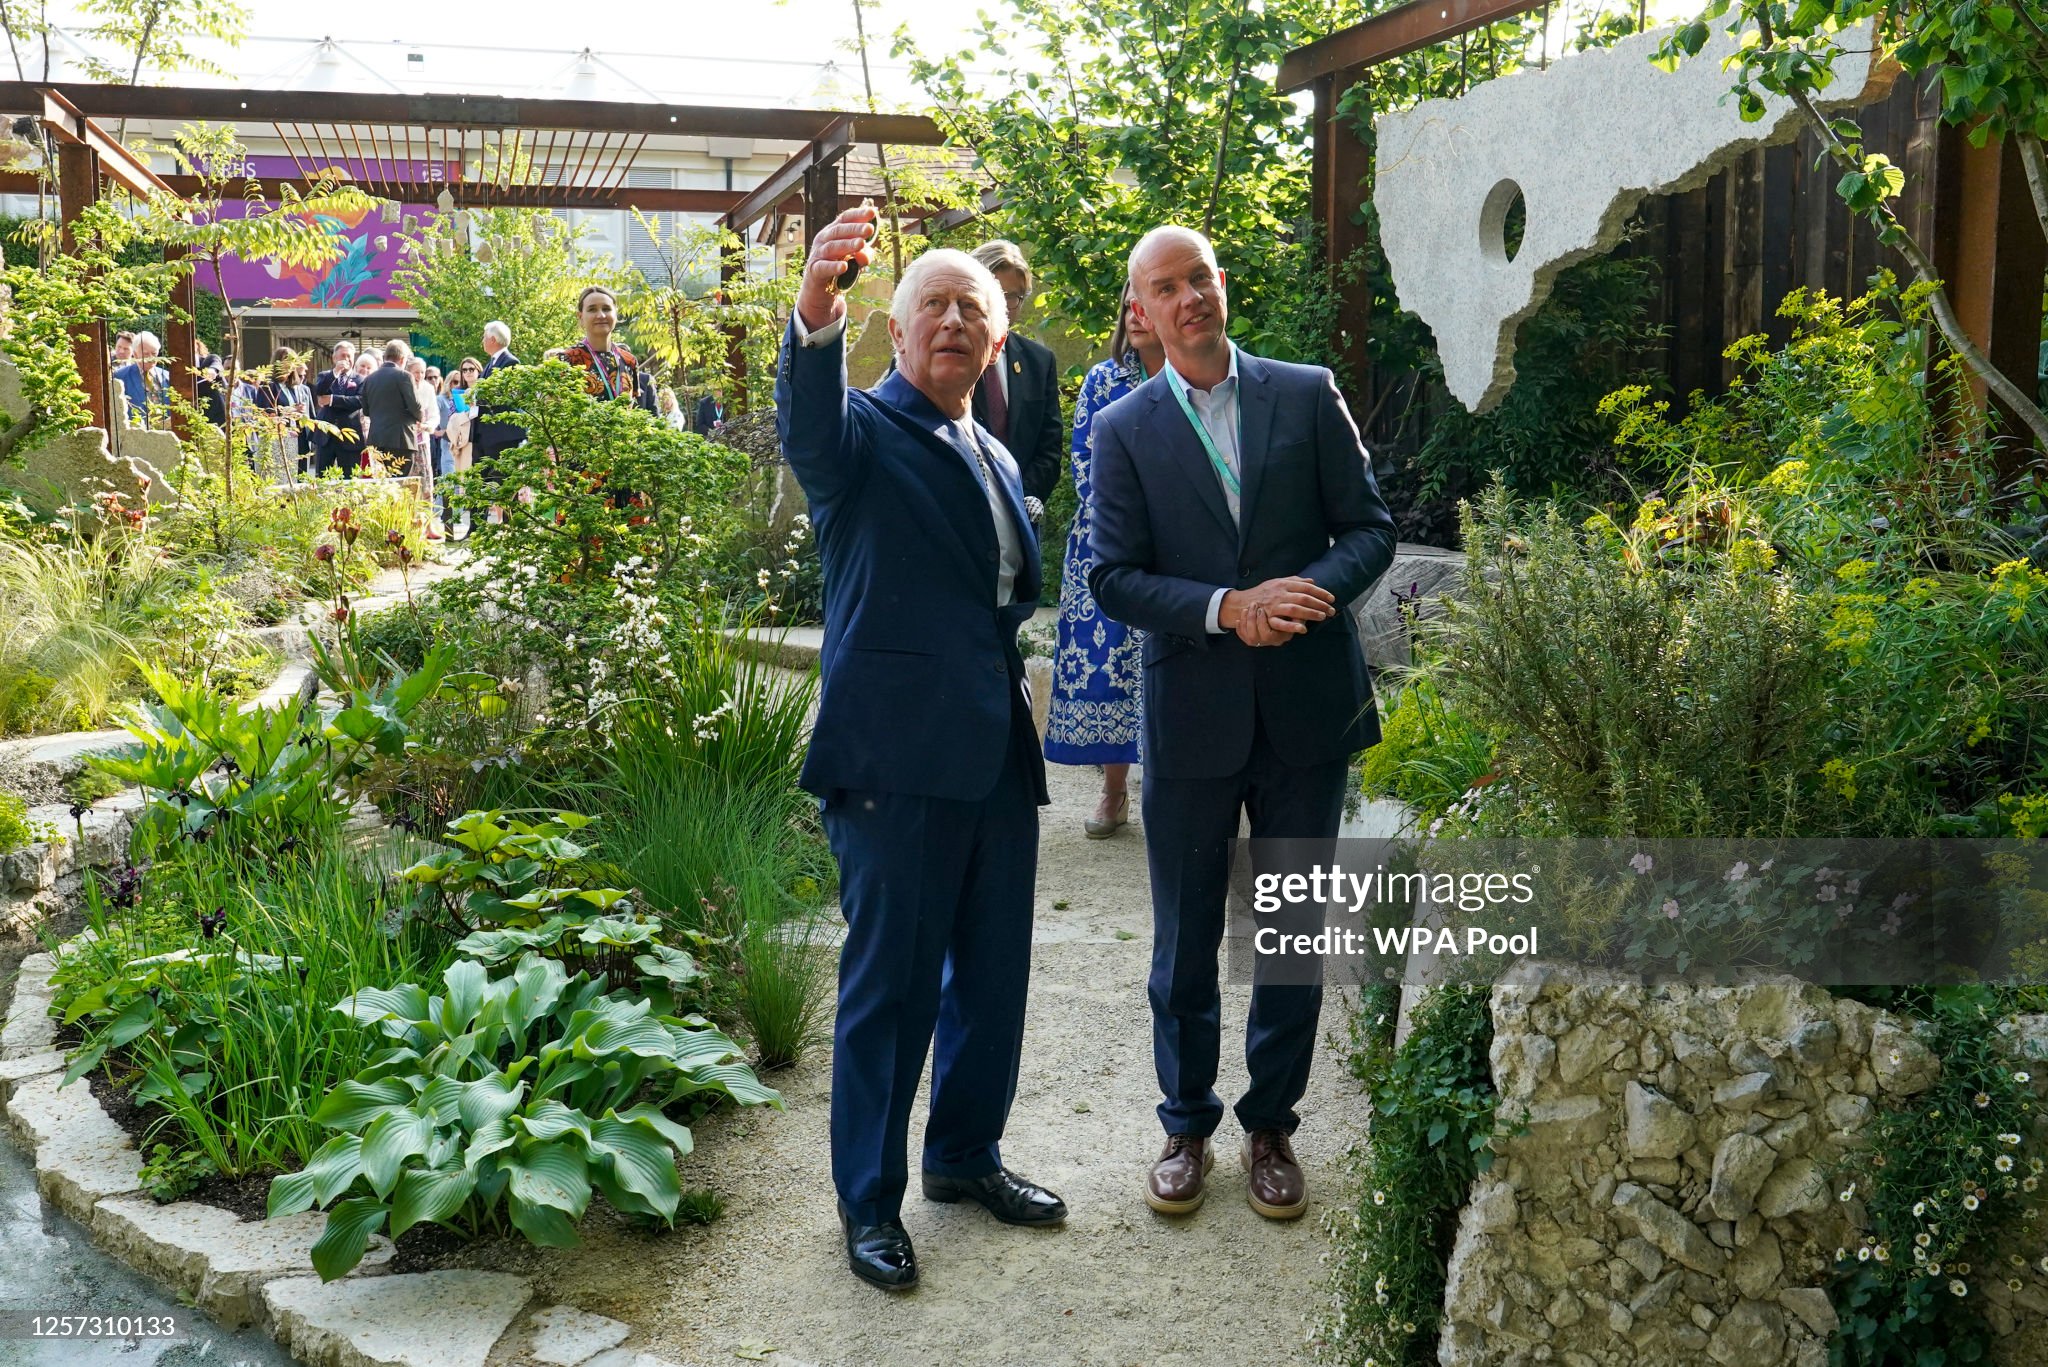 britains-king-charles-iii-visits-the-raymond-evison-clematis-stand-at-the-chelsea-flower-show.jpg